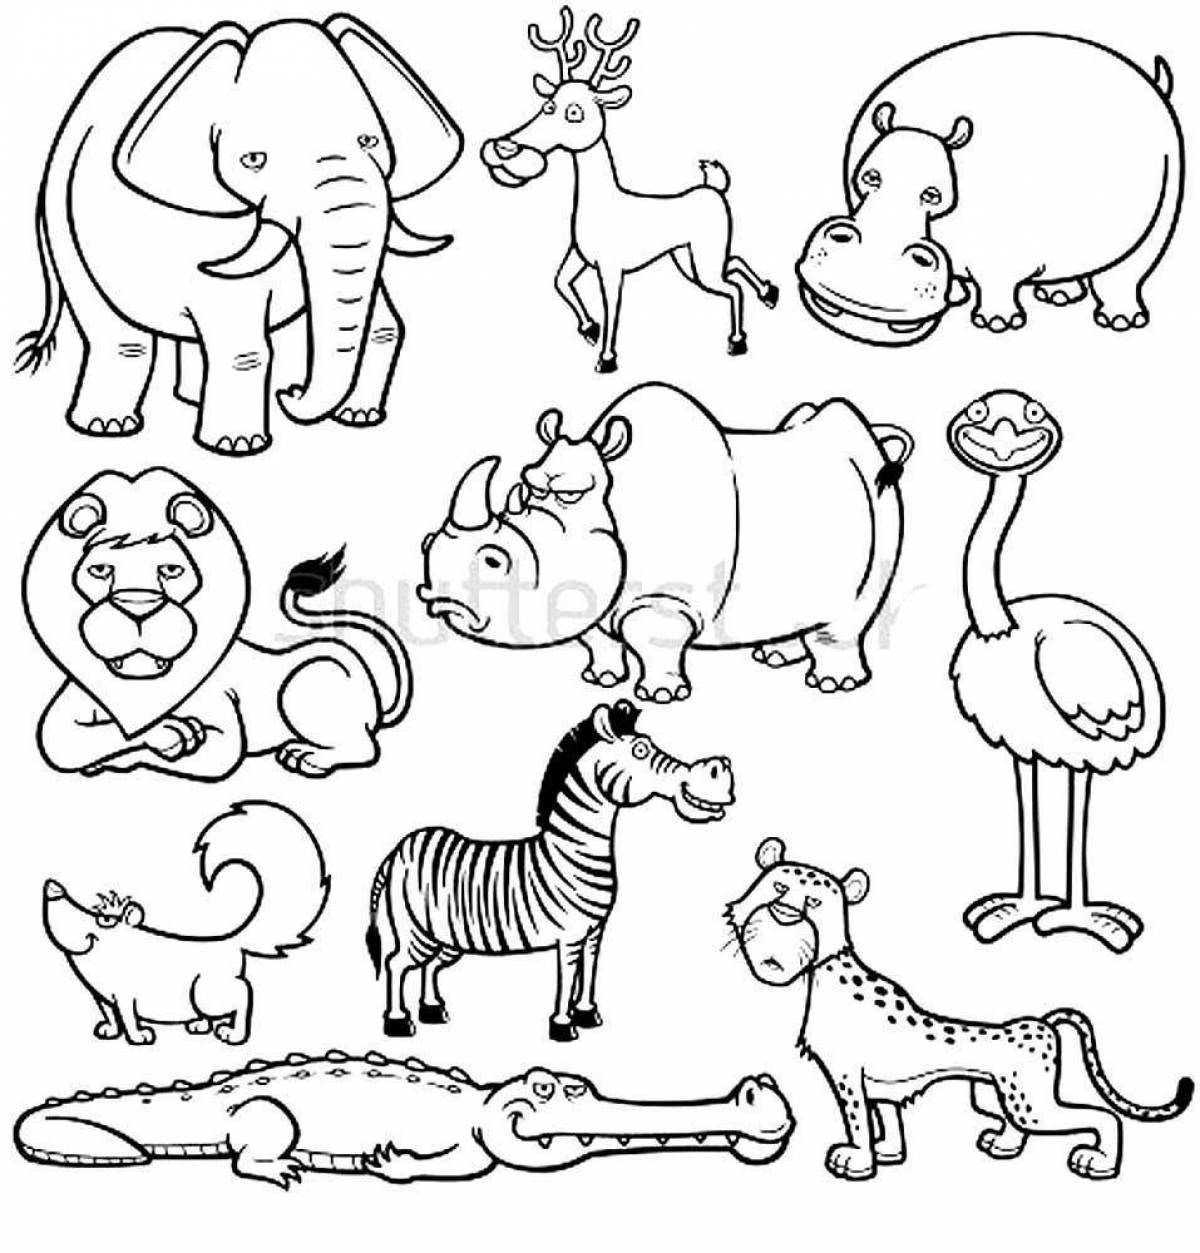 Adorable African animal coloring book for 3-4 year olds